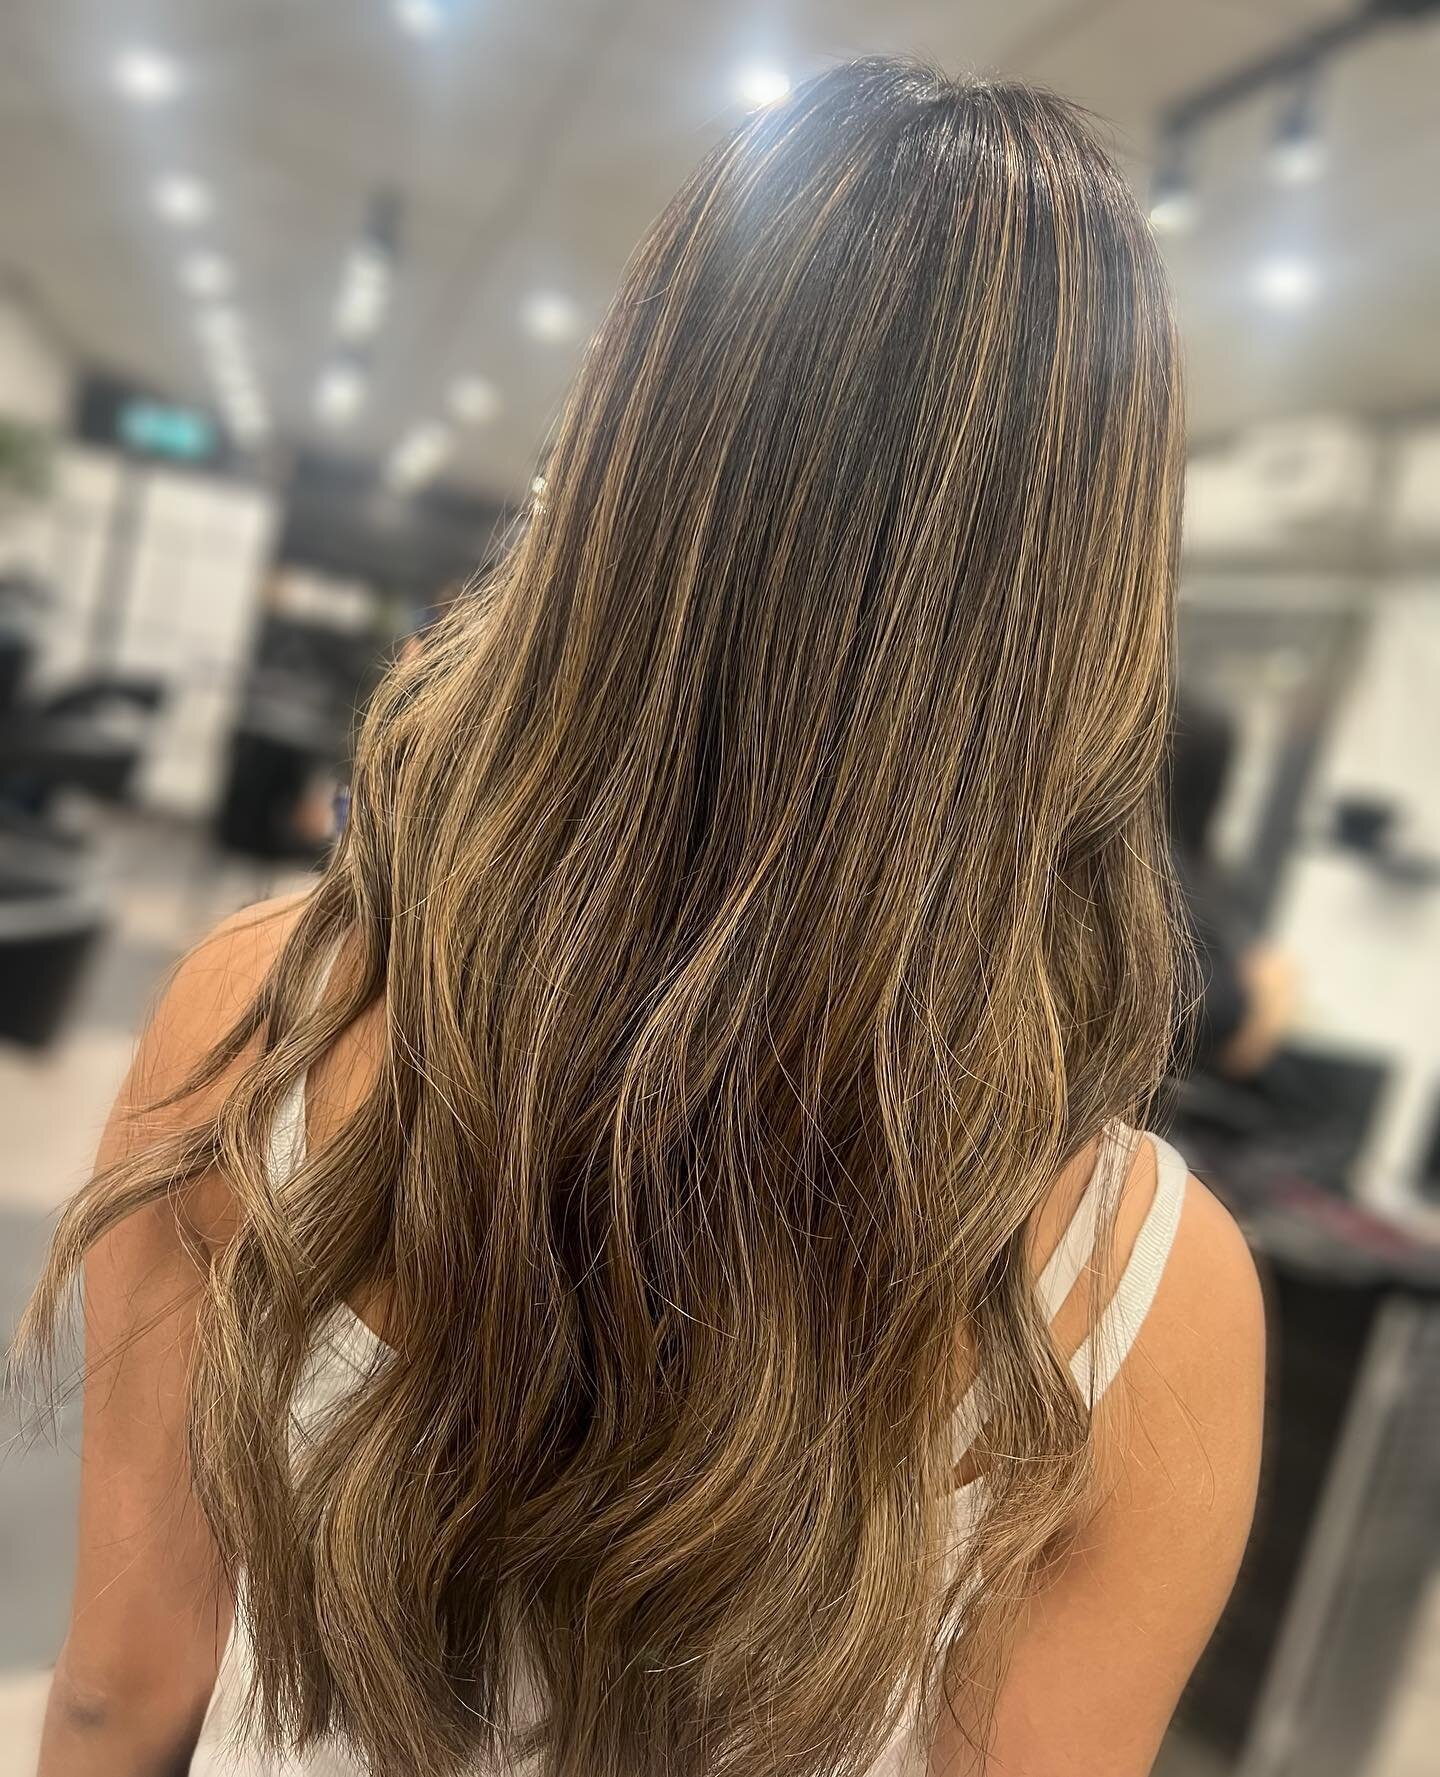 The perfect blend 
-
-
-
#haircut #hairstyles #hairtransformation #hairgoals #hairideas #hairlove #vancouverhairstylist #vancouverhair #vancouverhairdresser #vancouverhairsalon #vancouverbalayage #vancouverblonde #vancouverblondespecialist #yvrhair #